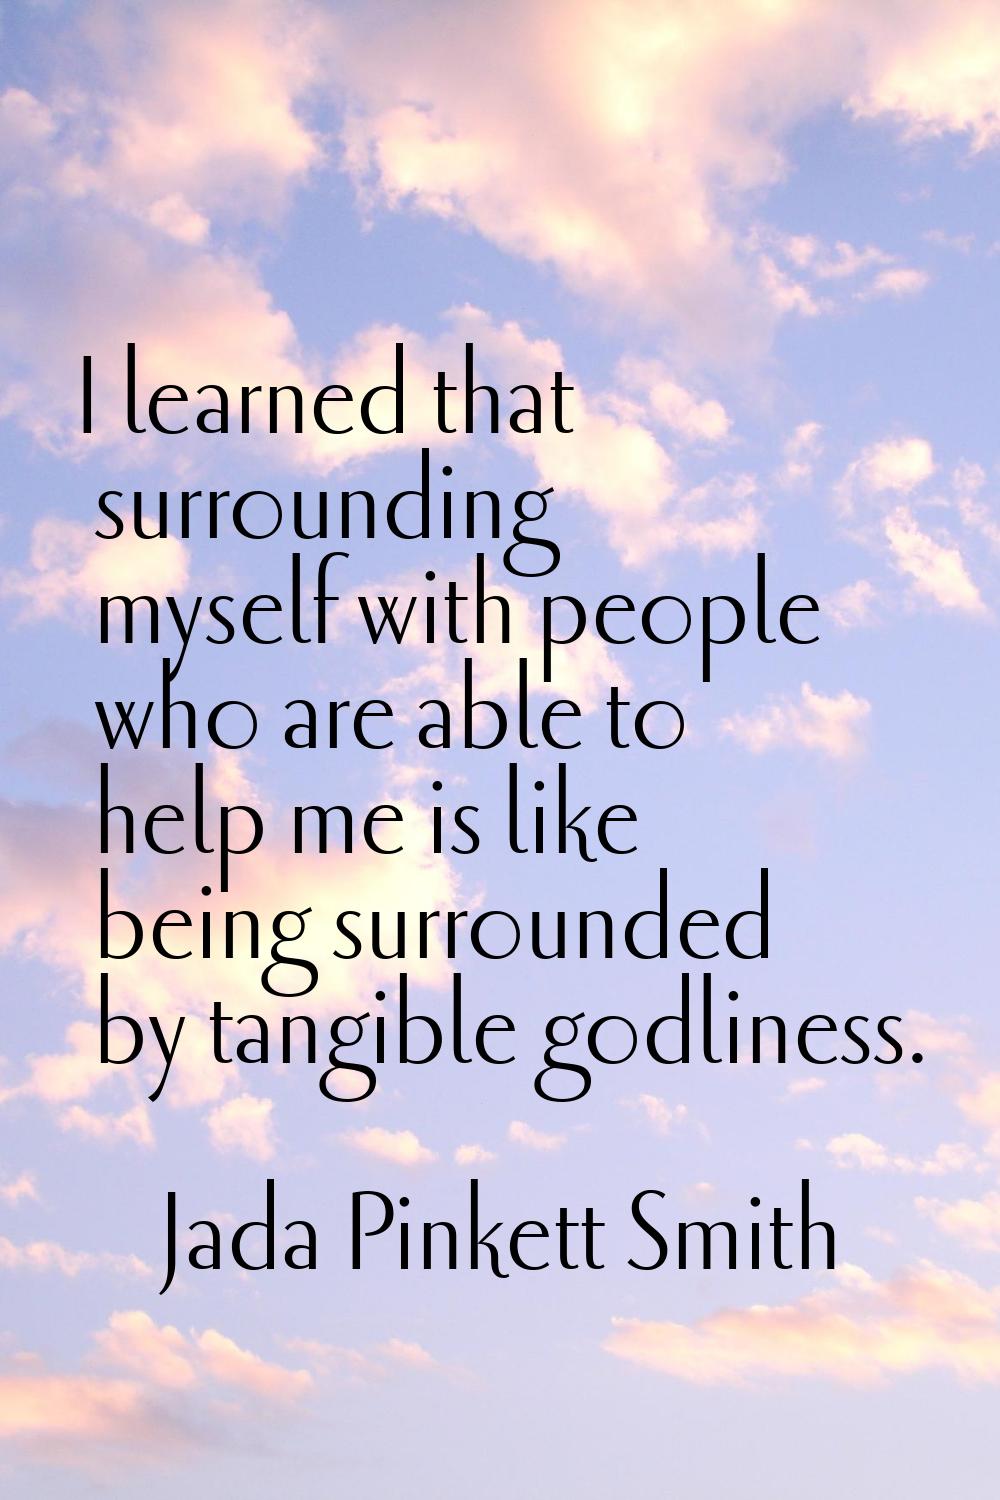 I learned that surrounding myself with people who are able to help me is like being surrounded by t